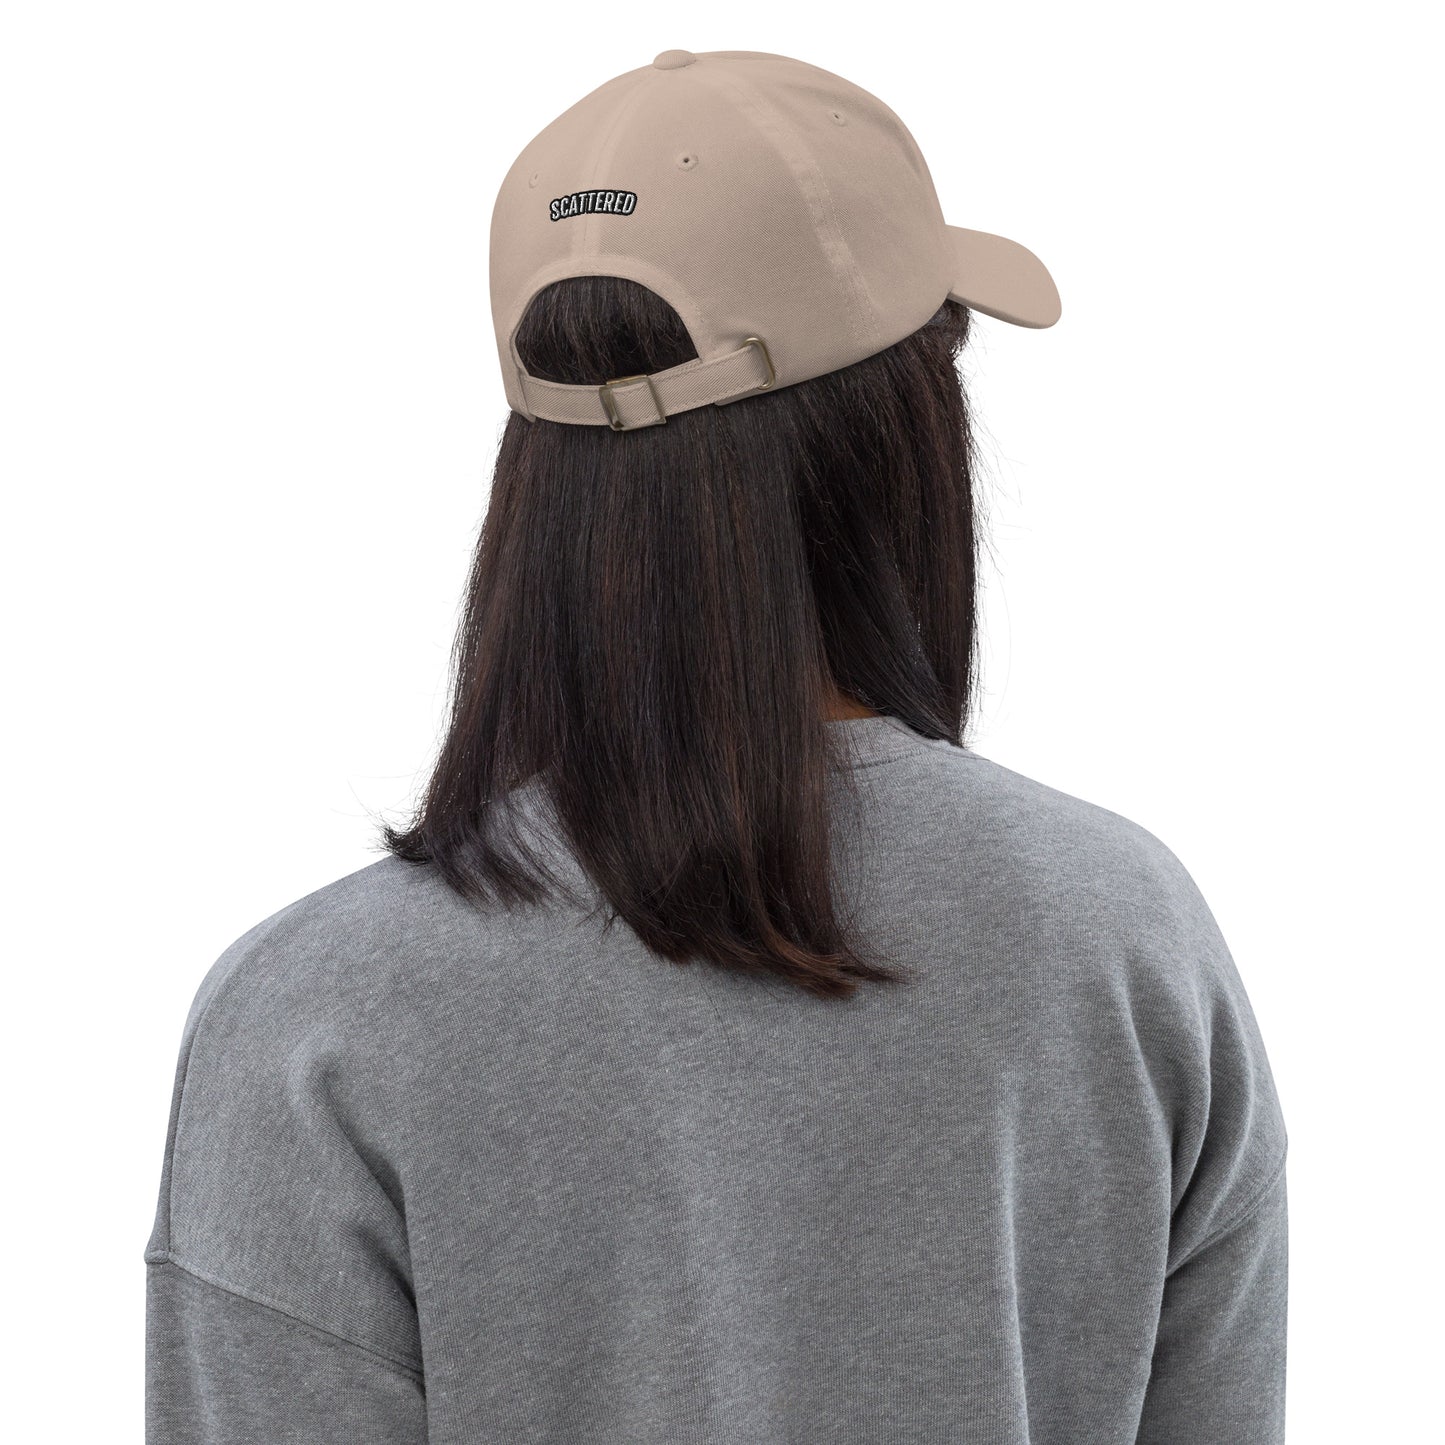 New York Apple Logo Embroidered Tan Dad Hat Scattered Streetwear